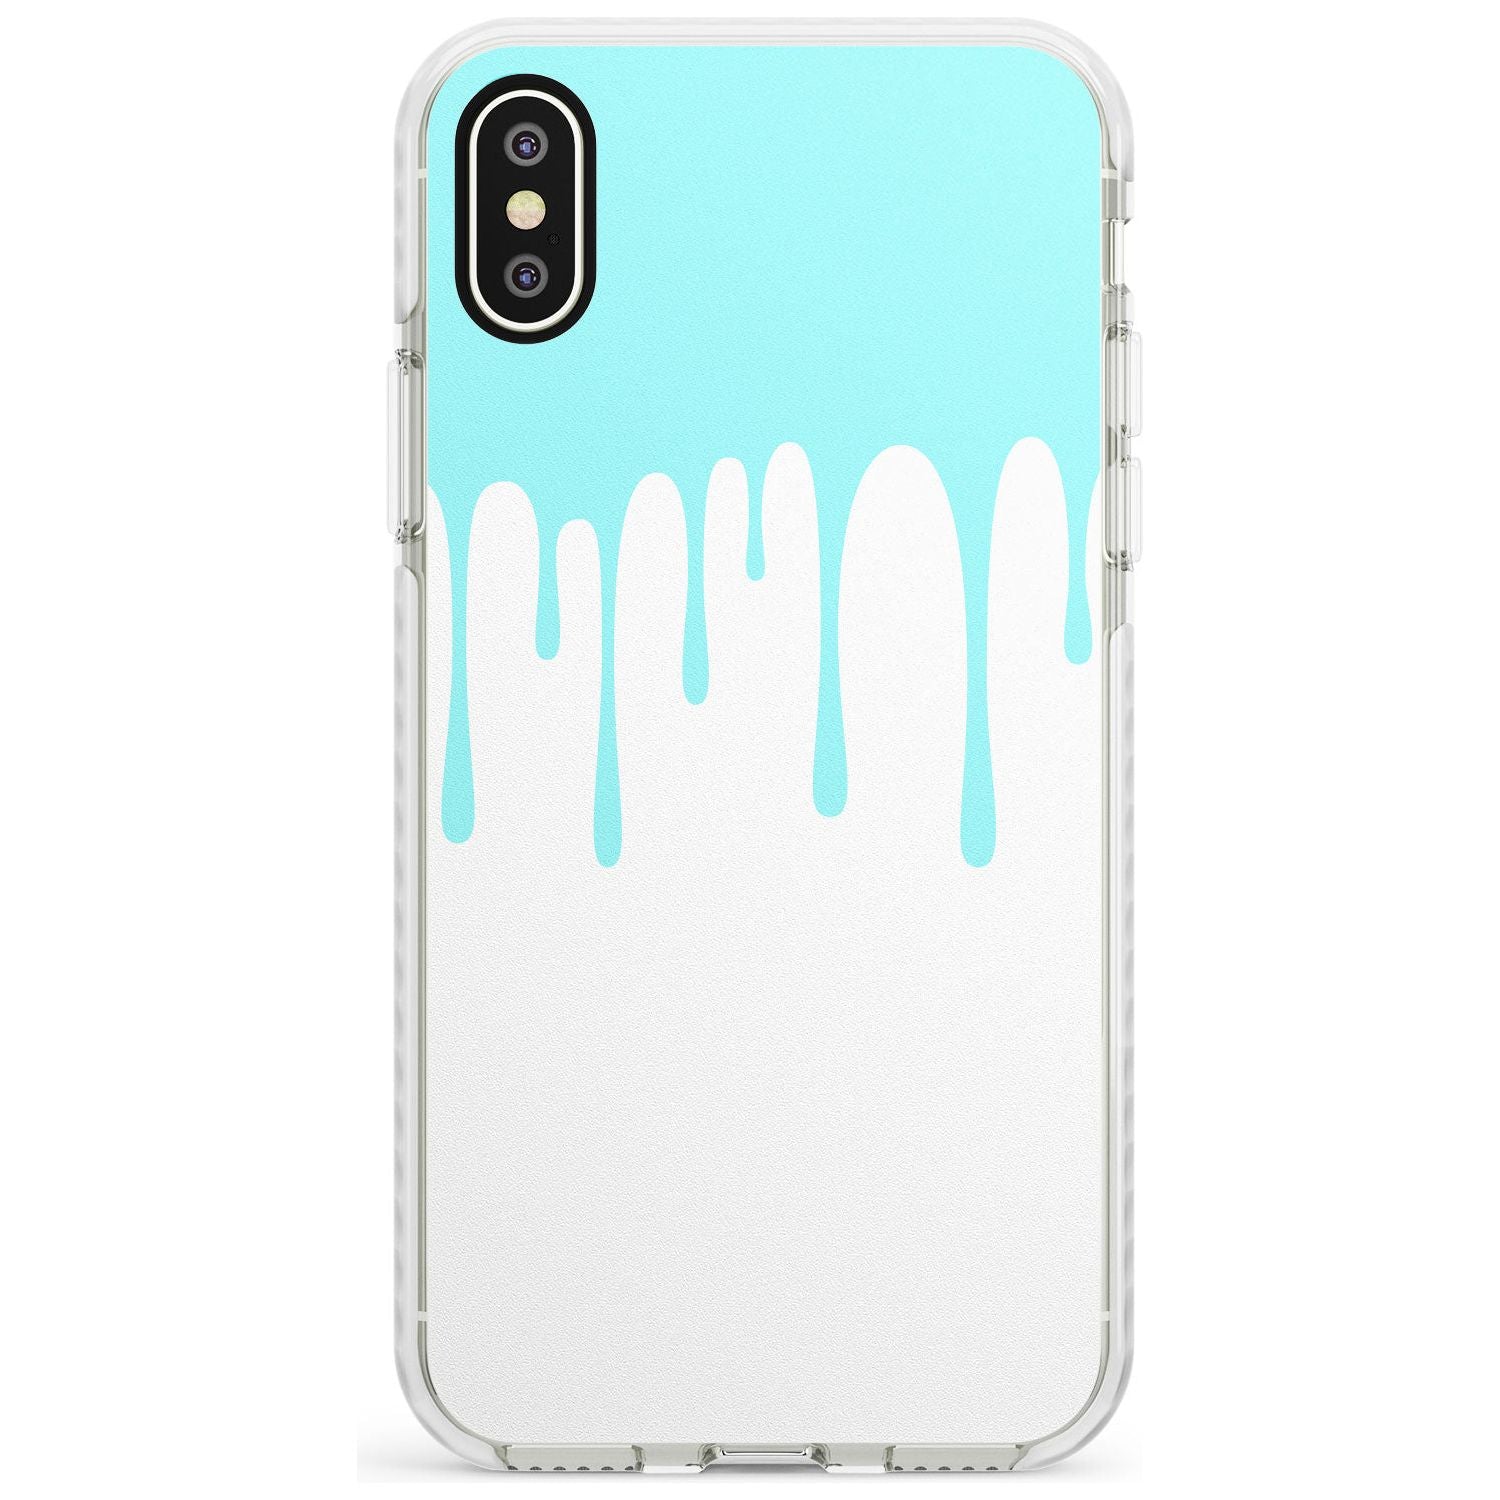 Melted Effect: Teal & White iPhone Case Impact Phone Case Warehouse X XS Max XR